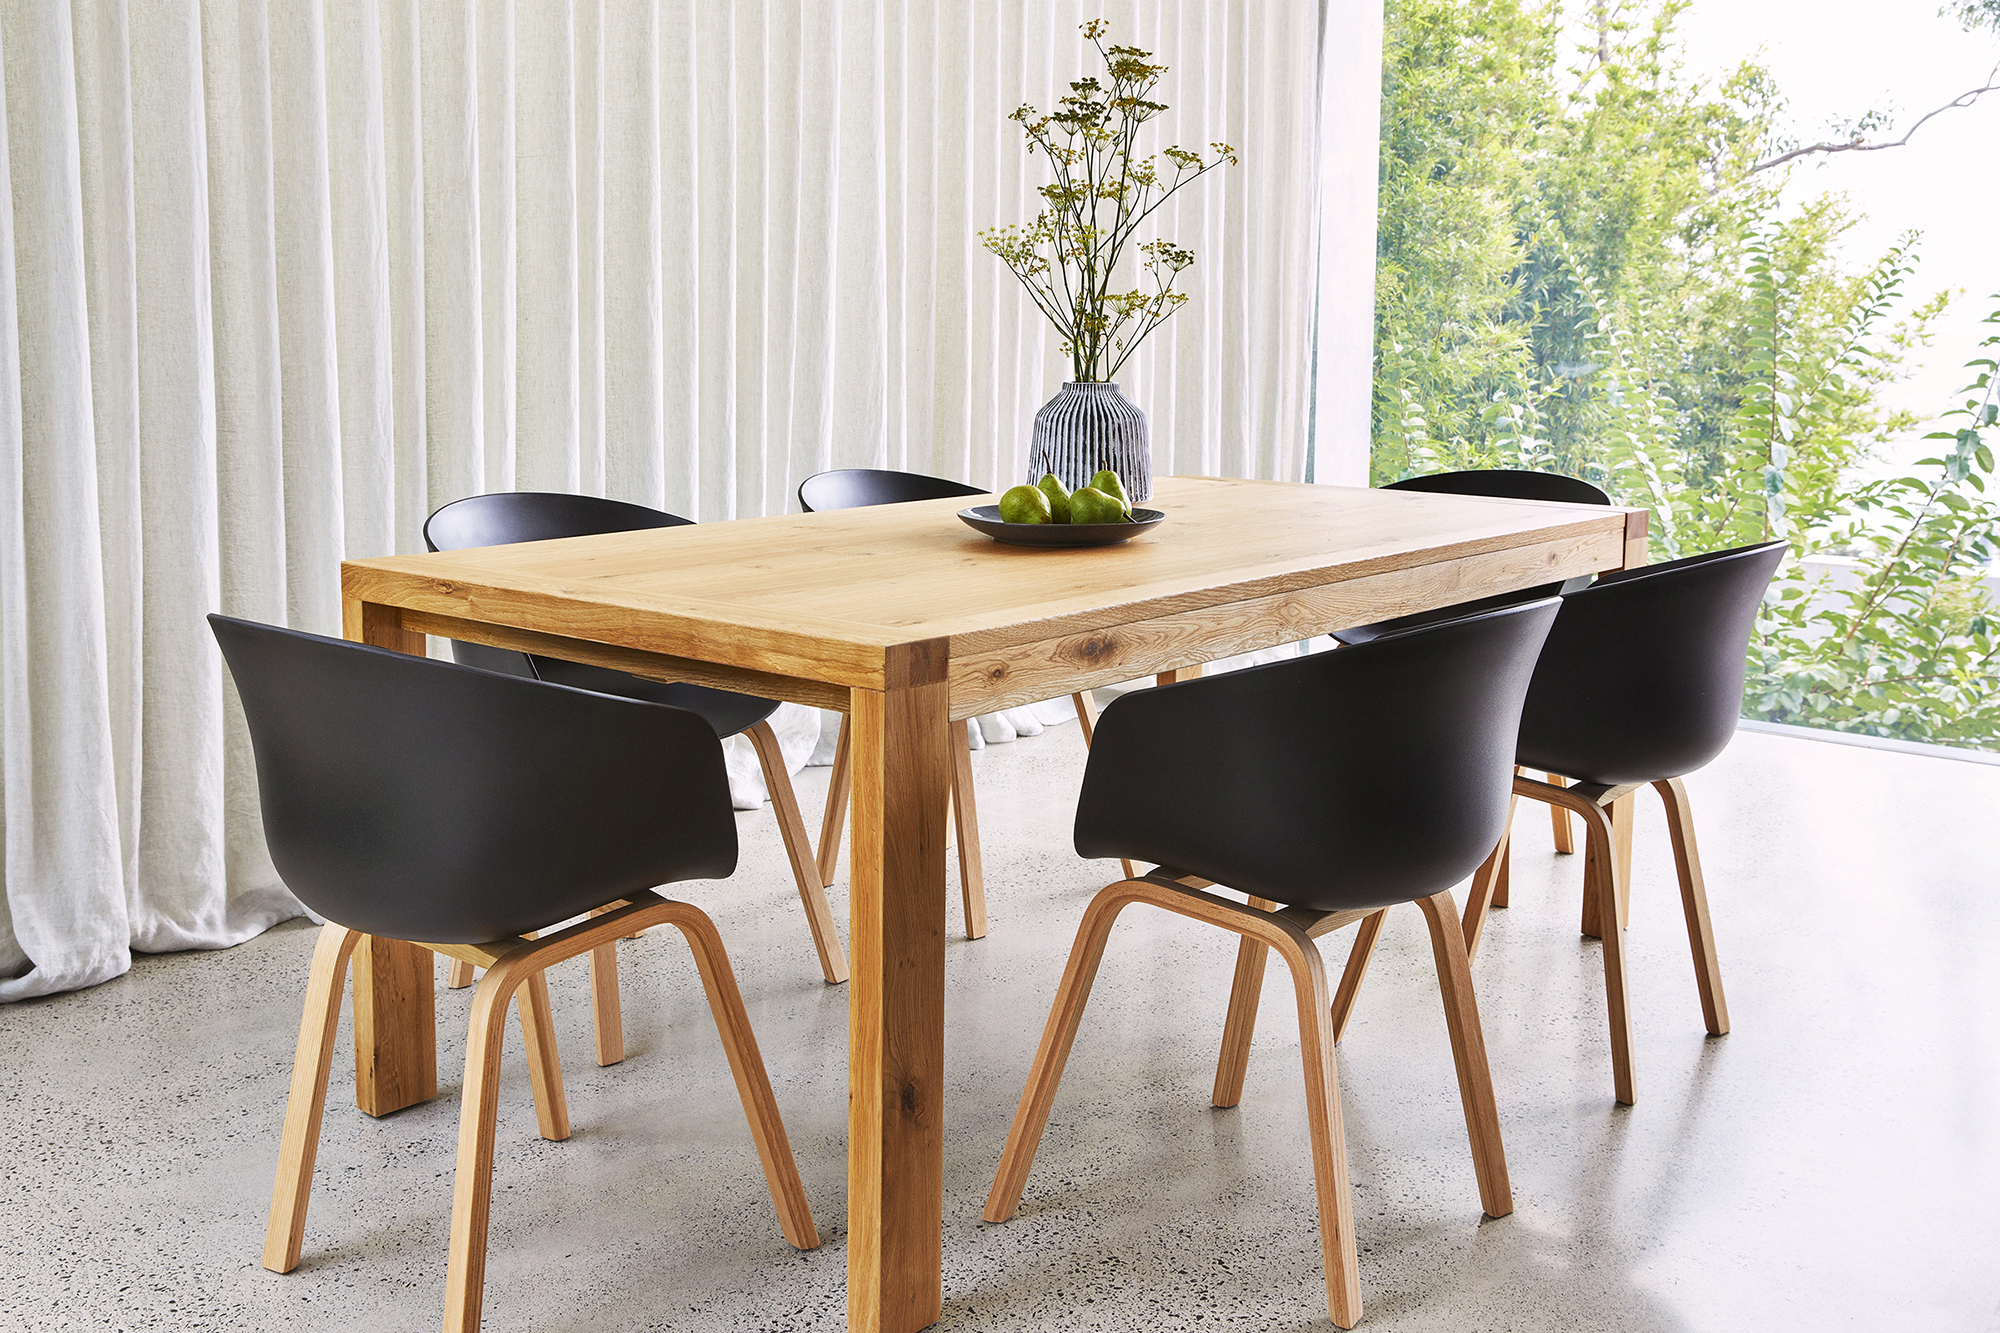 Choosing the right dining table for your home